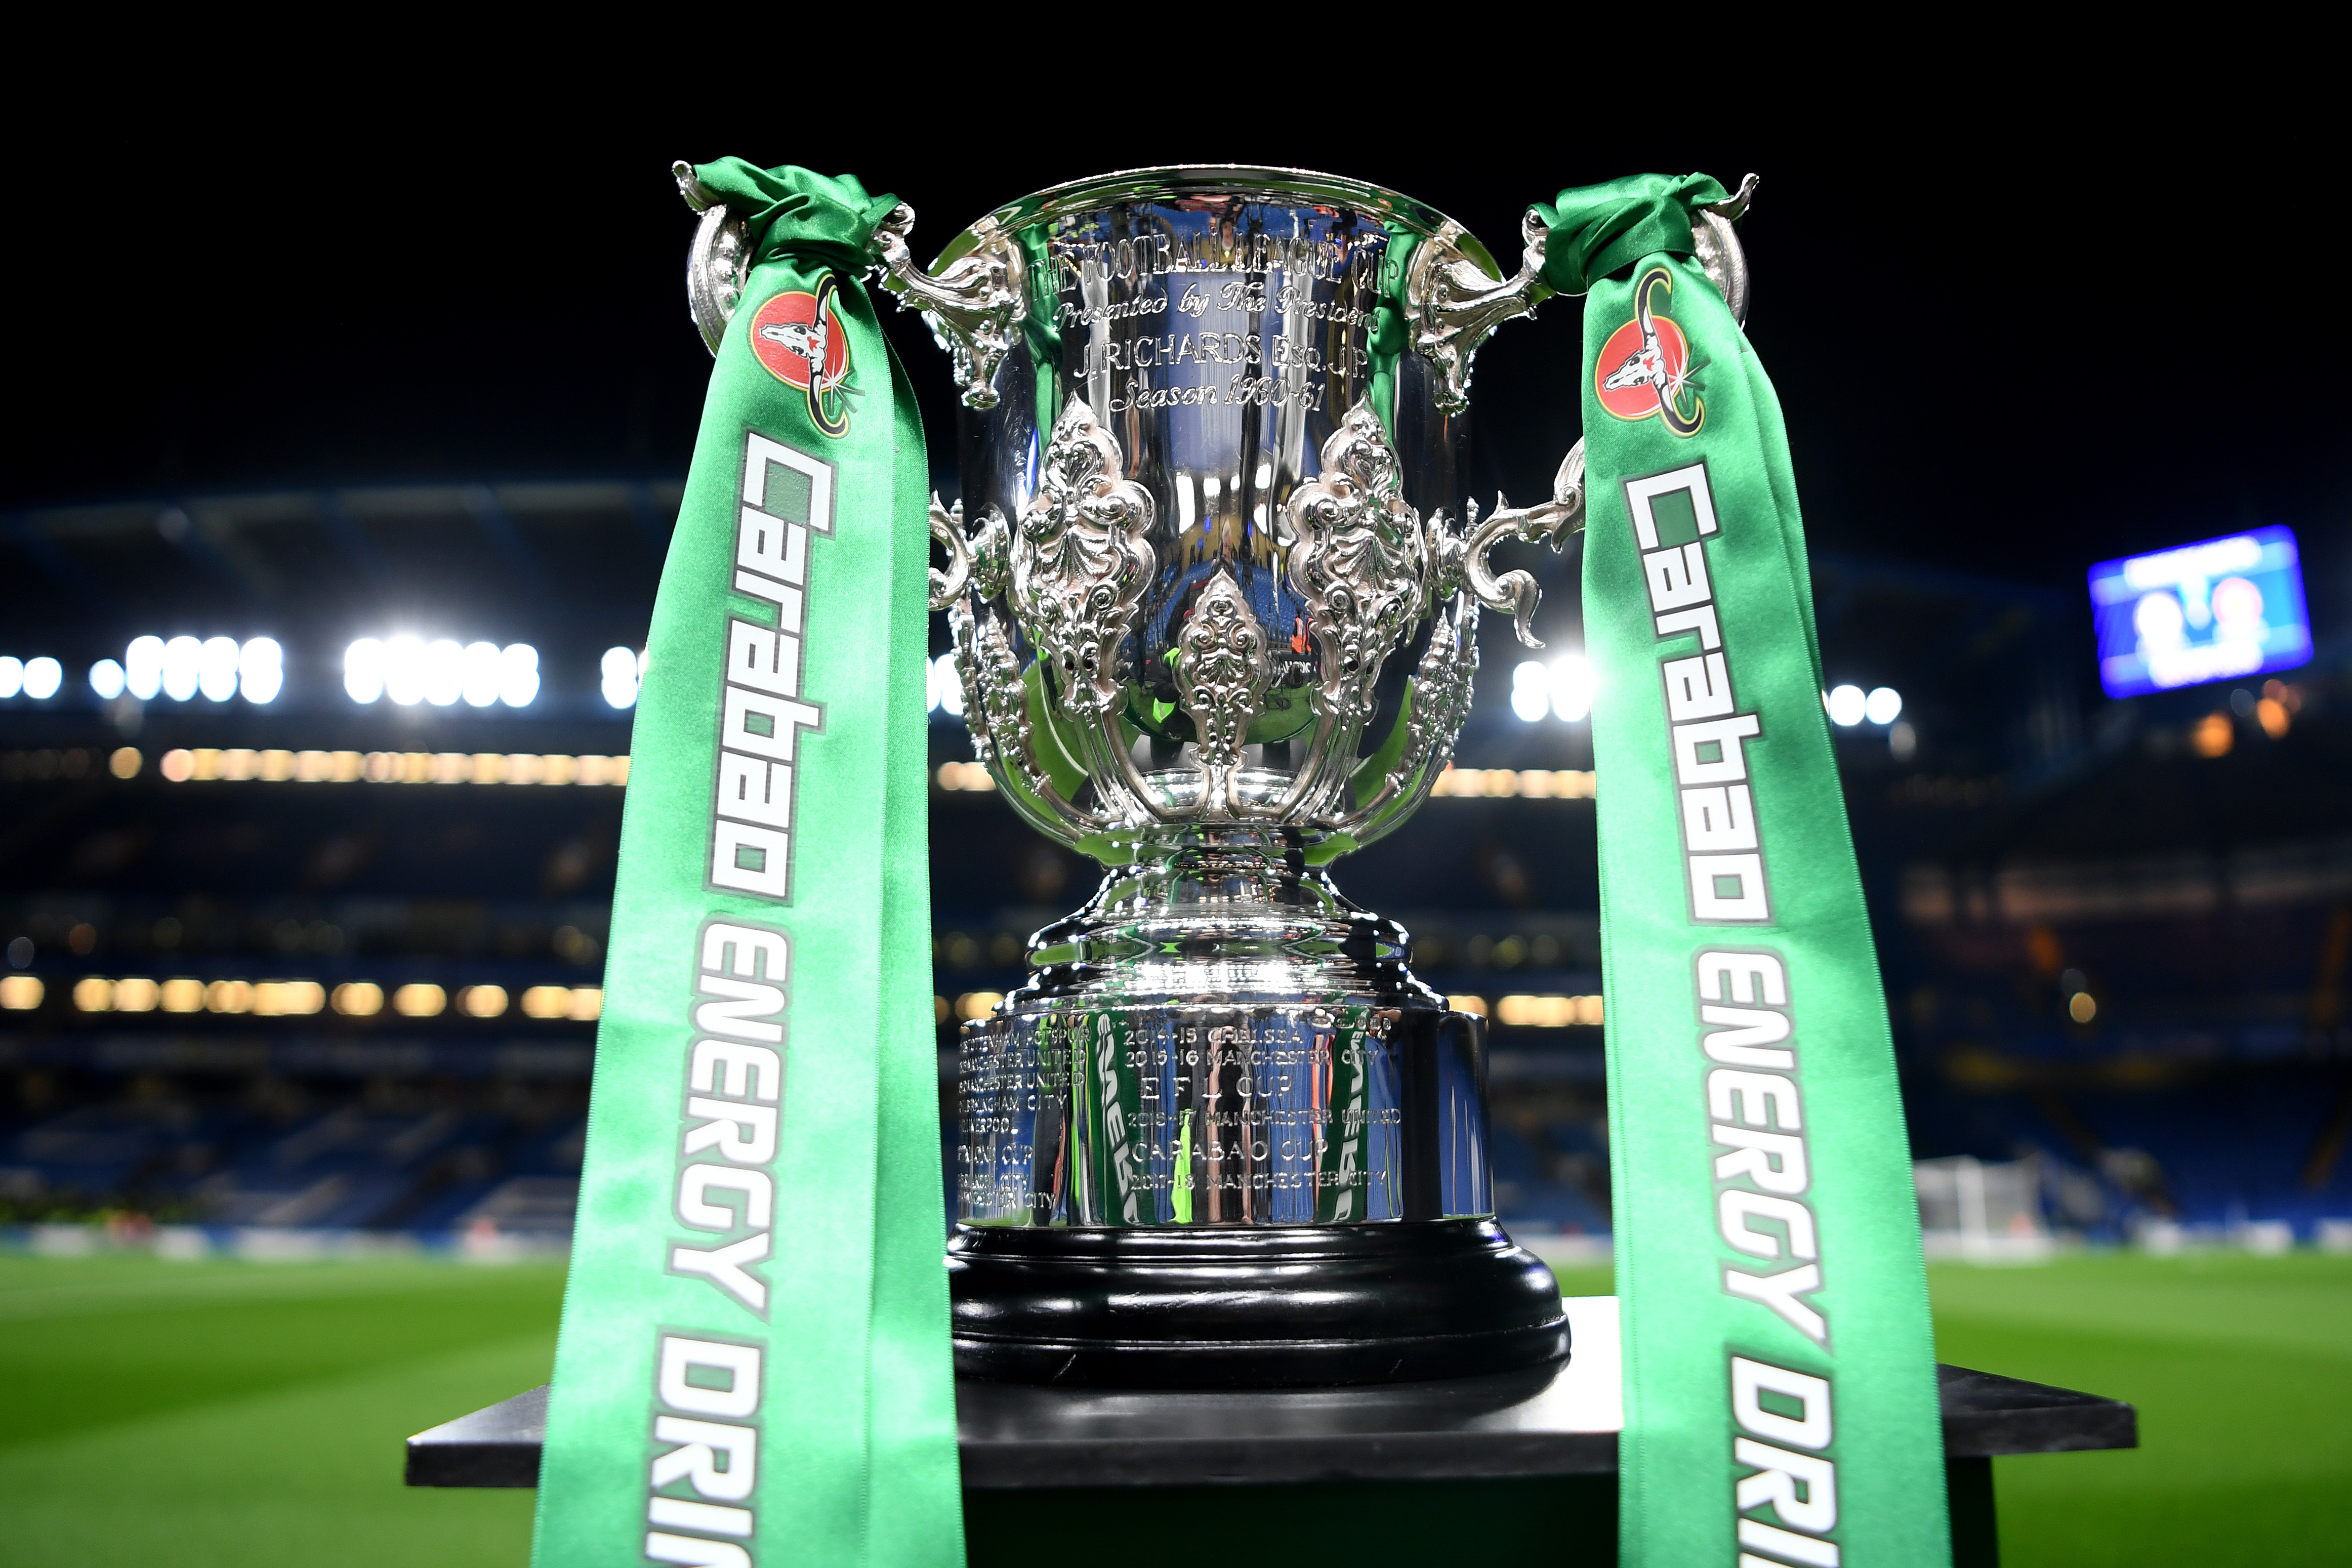 LONDON, ENGLAND - OCTOBER 30: The Carabao Cup is seen pitchside prior to the Carabao Cup Round of 16 match between Chelsea and Manchester United at Stamford Bridge on October 30, 2019 in London, England. (Photo by Michael Regan/Getty Images)